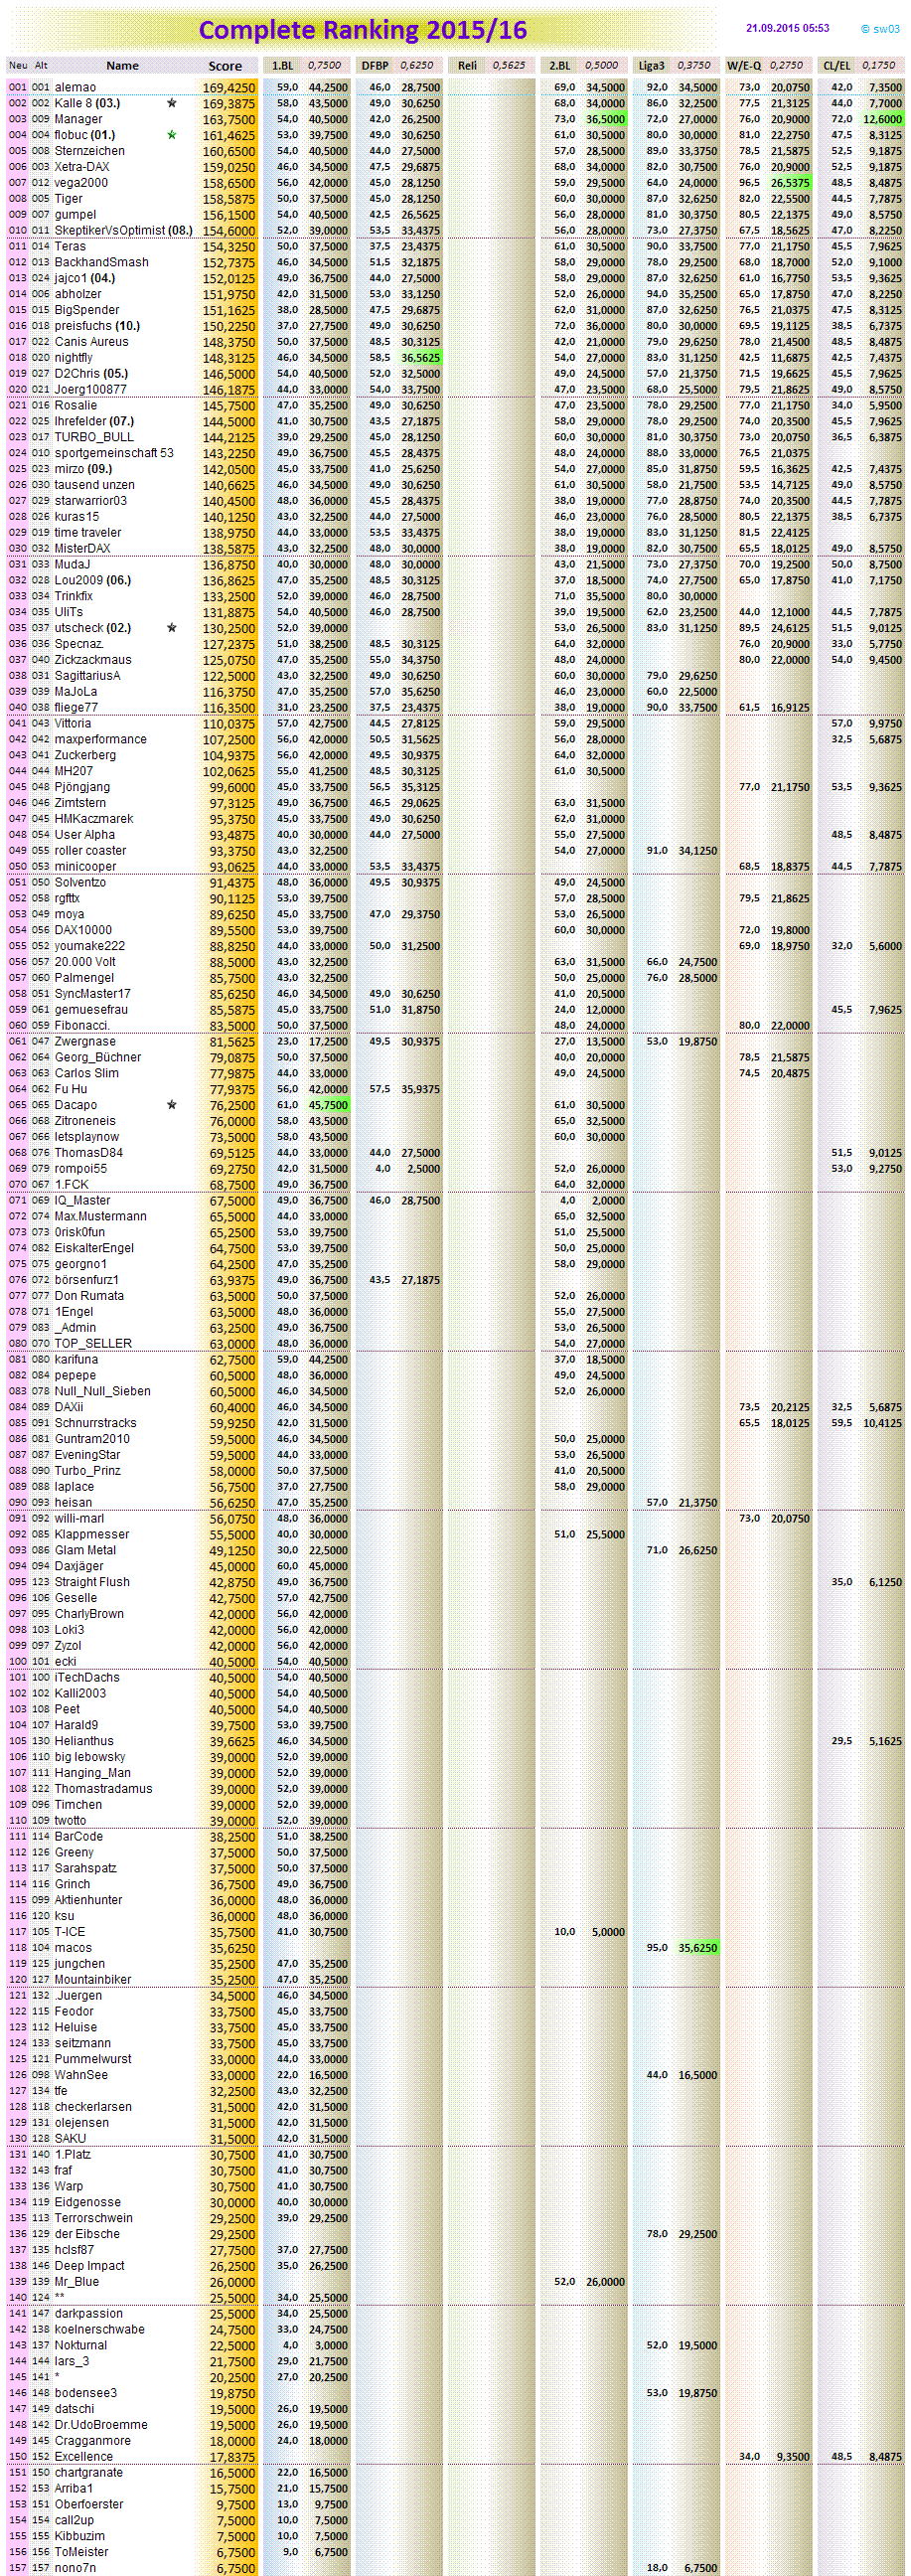 completeranking2015-16.png